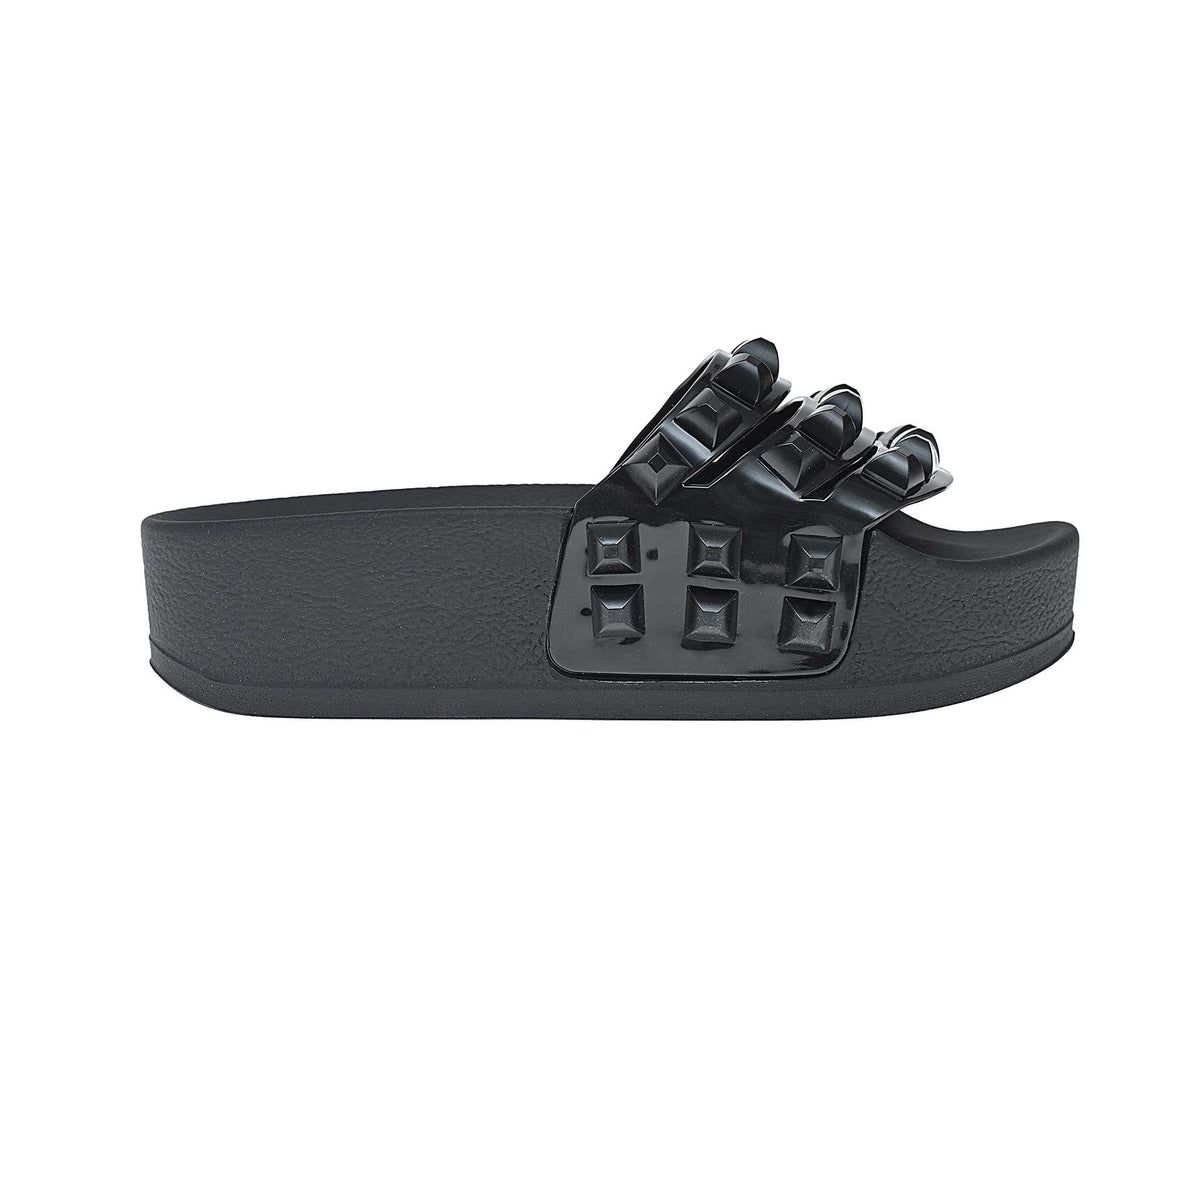 Carmen black platform sandals are trendy twist to your summer look - Vacation lovers. Jelly sandals from carmen sol